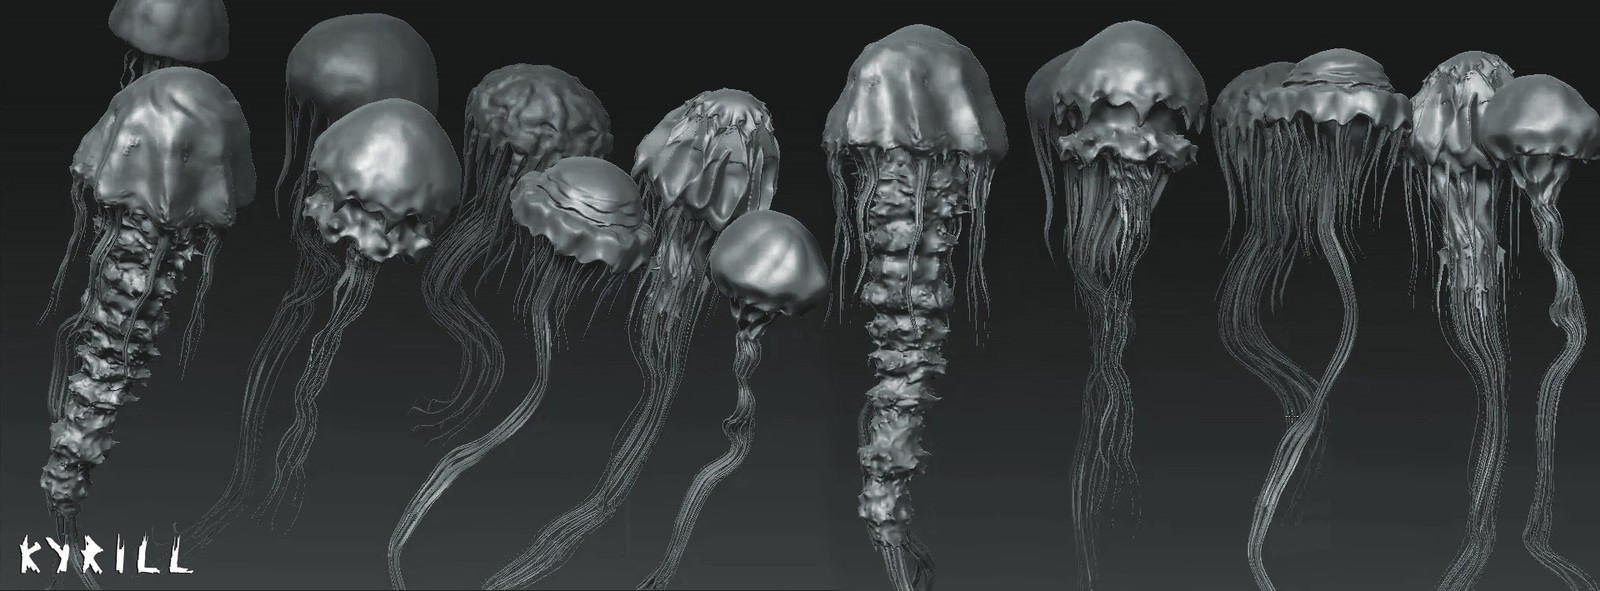 I actually had fun sculpting the jellyfishes.